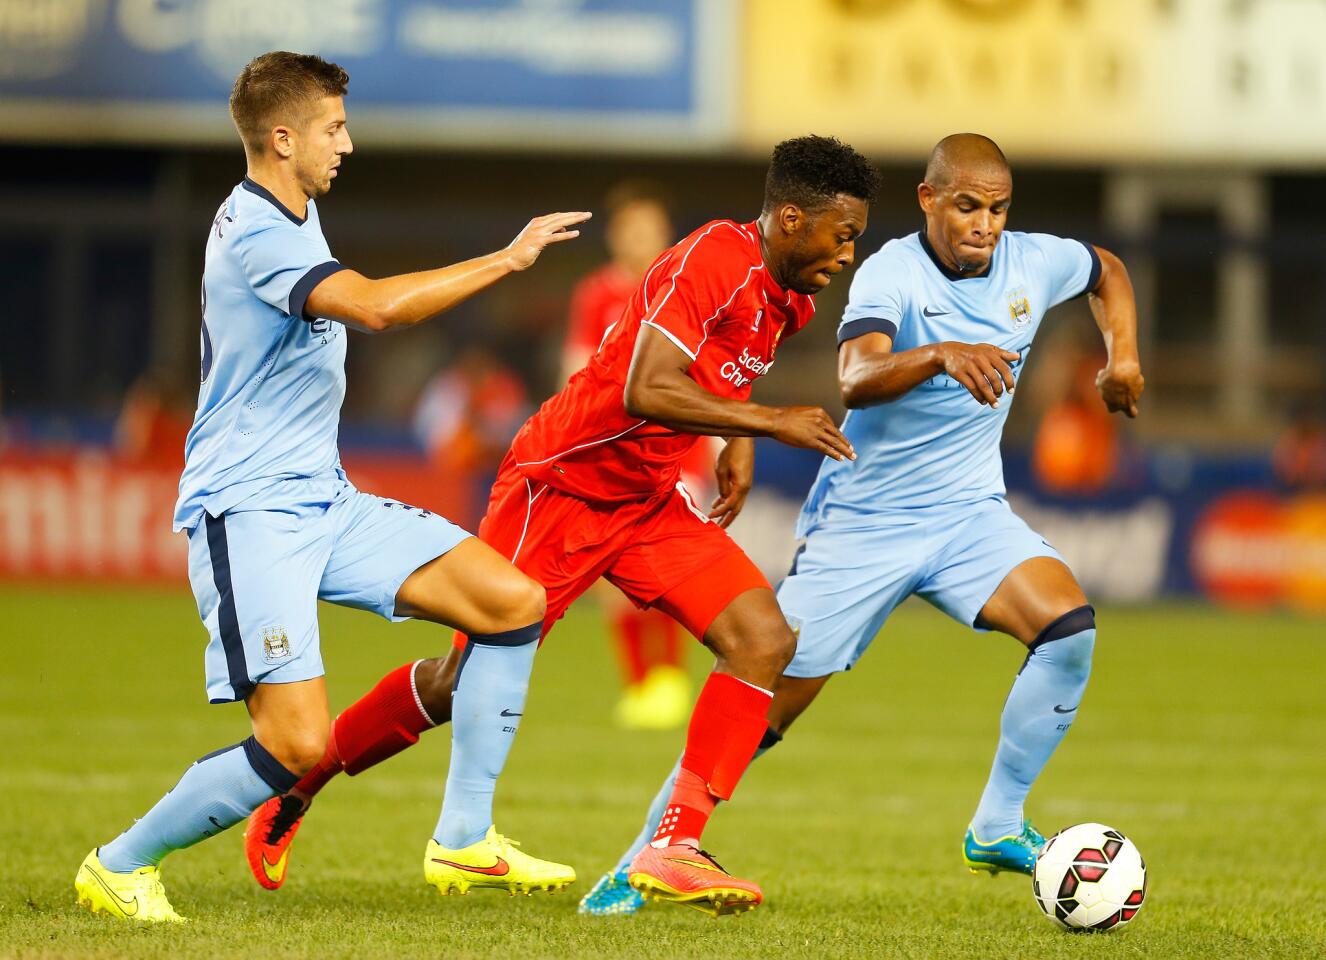 International Champions Cup 2014 - Manchester City v Liverpool